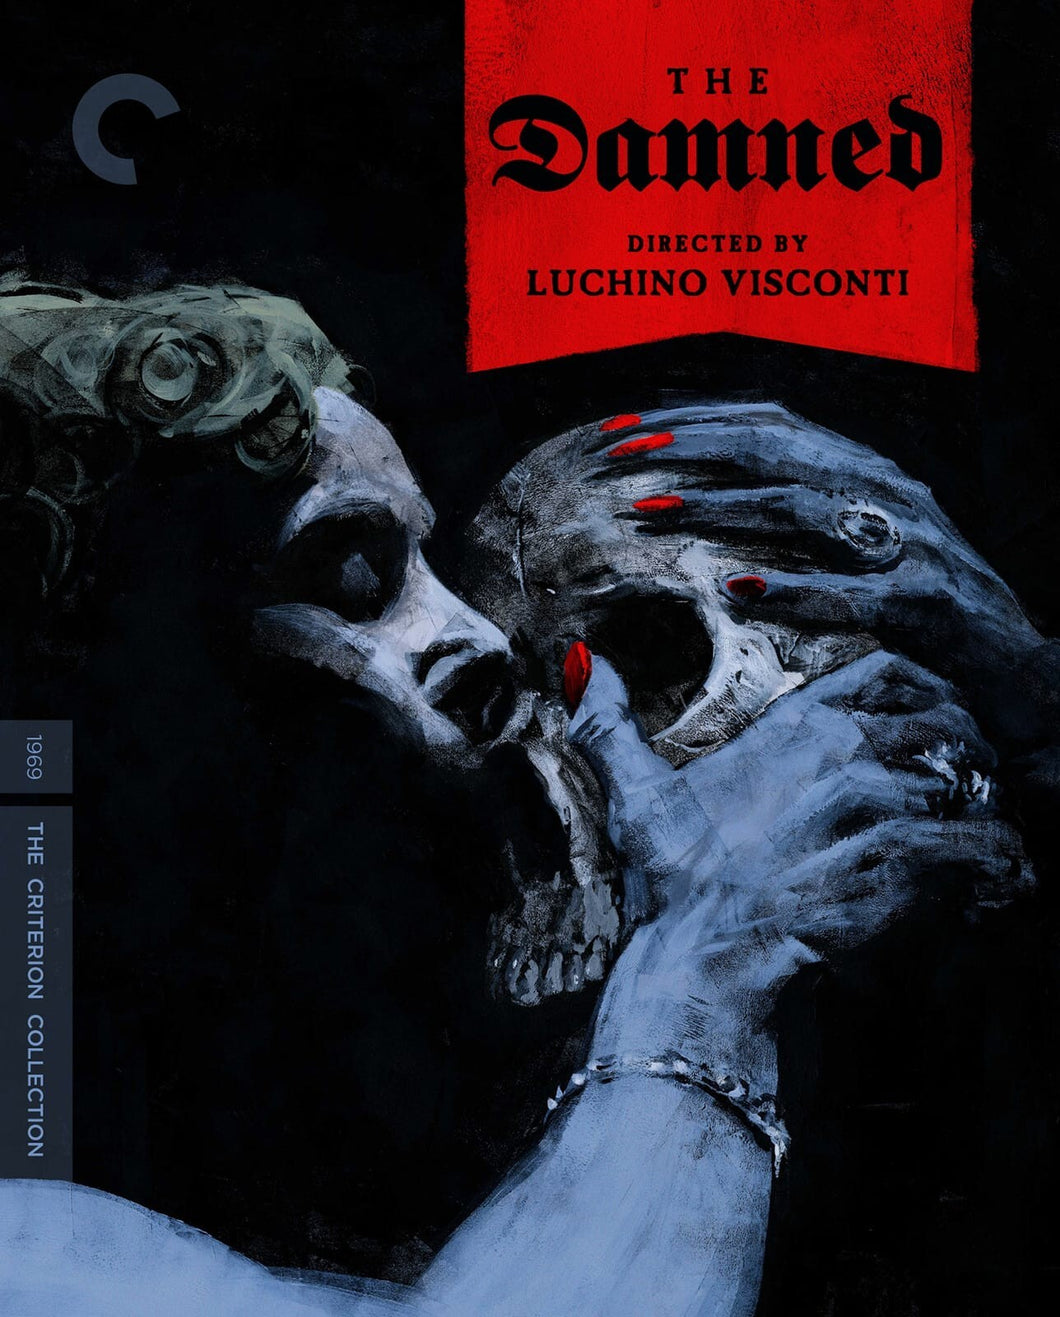 The Damned (1969) de Luchino Visconti - front cover